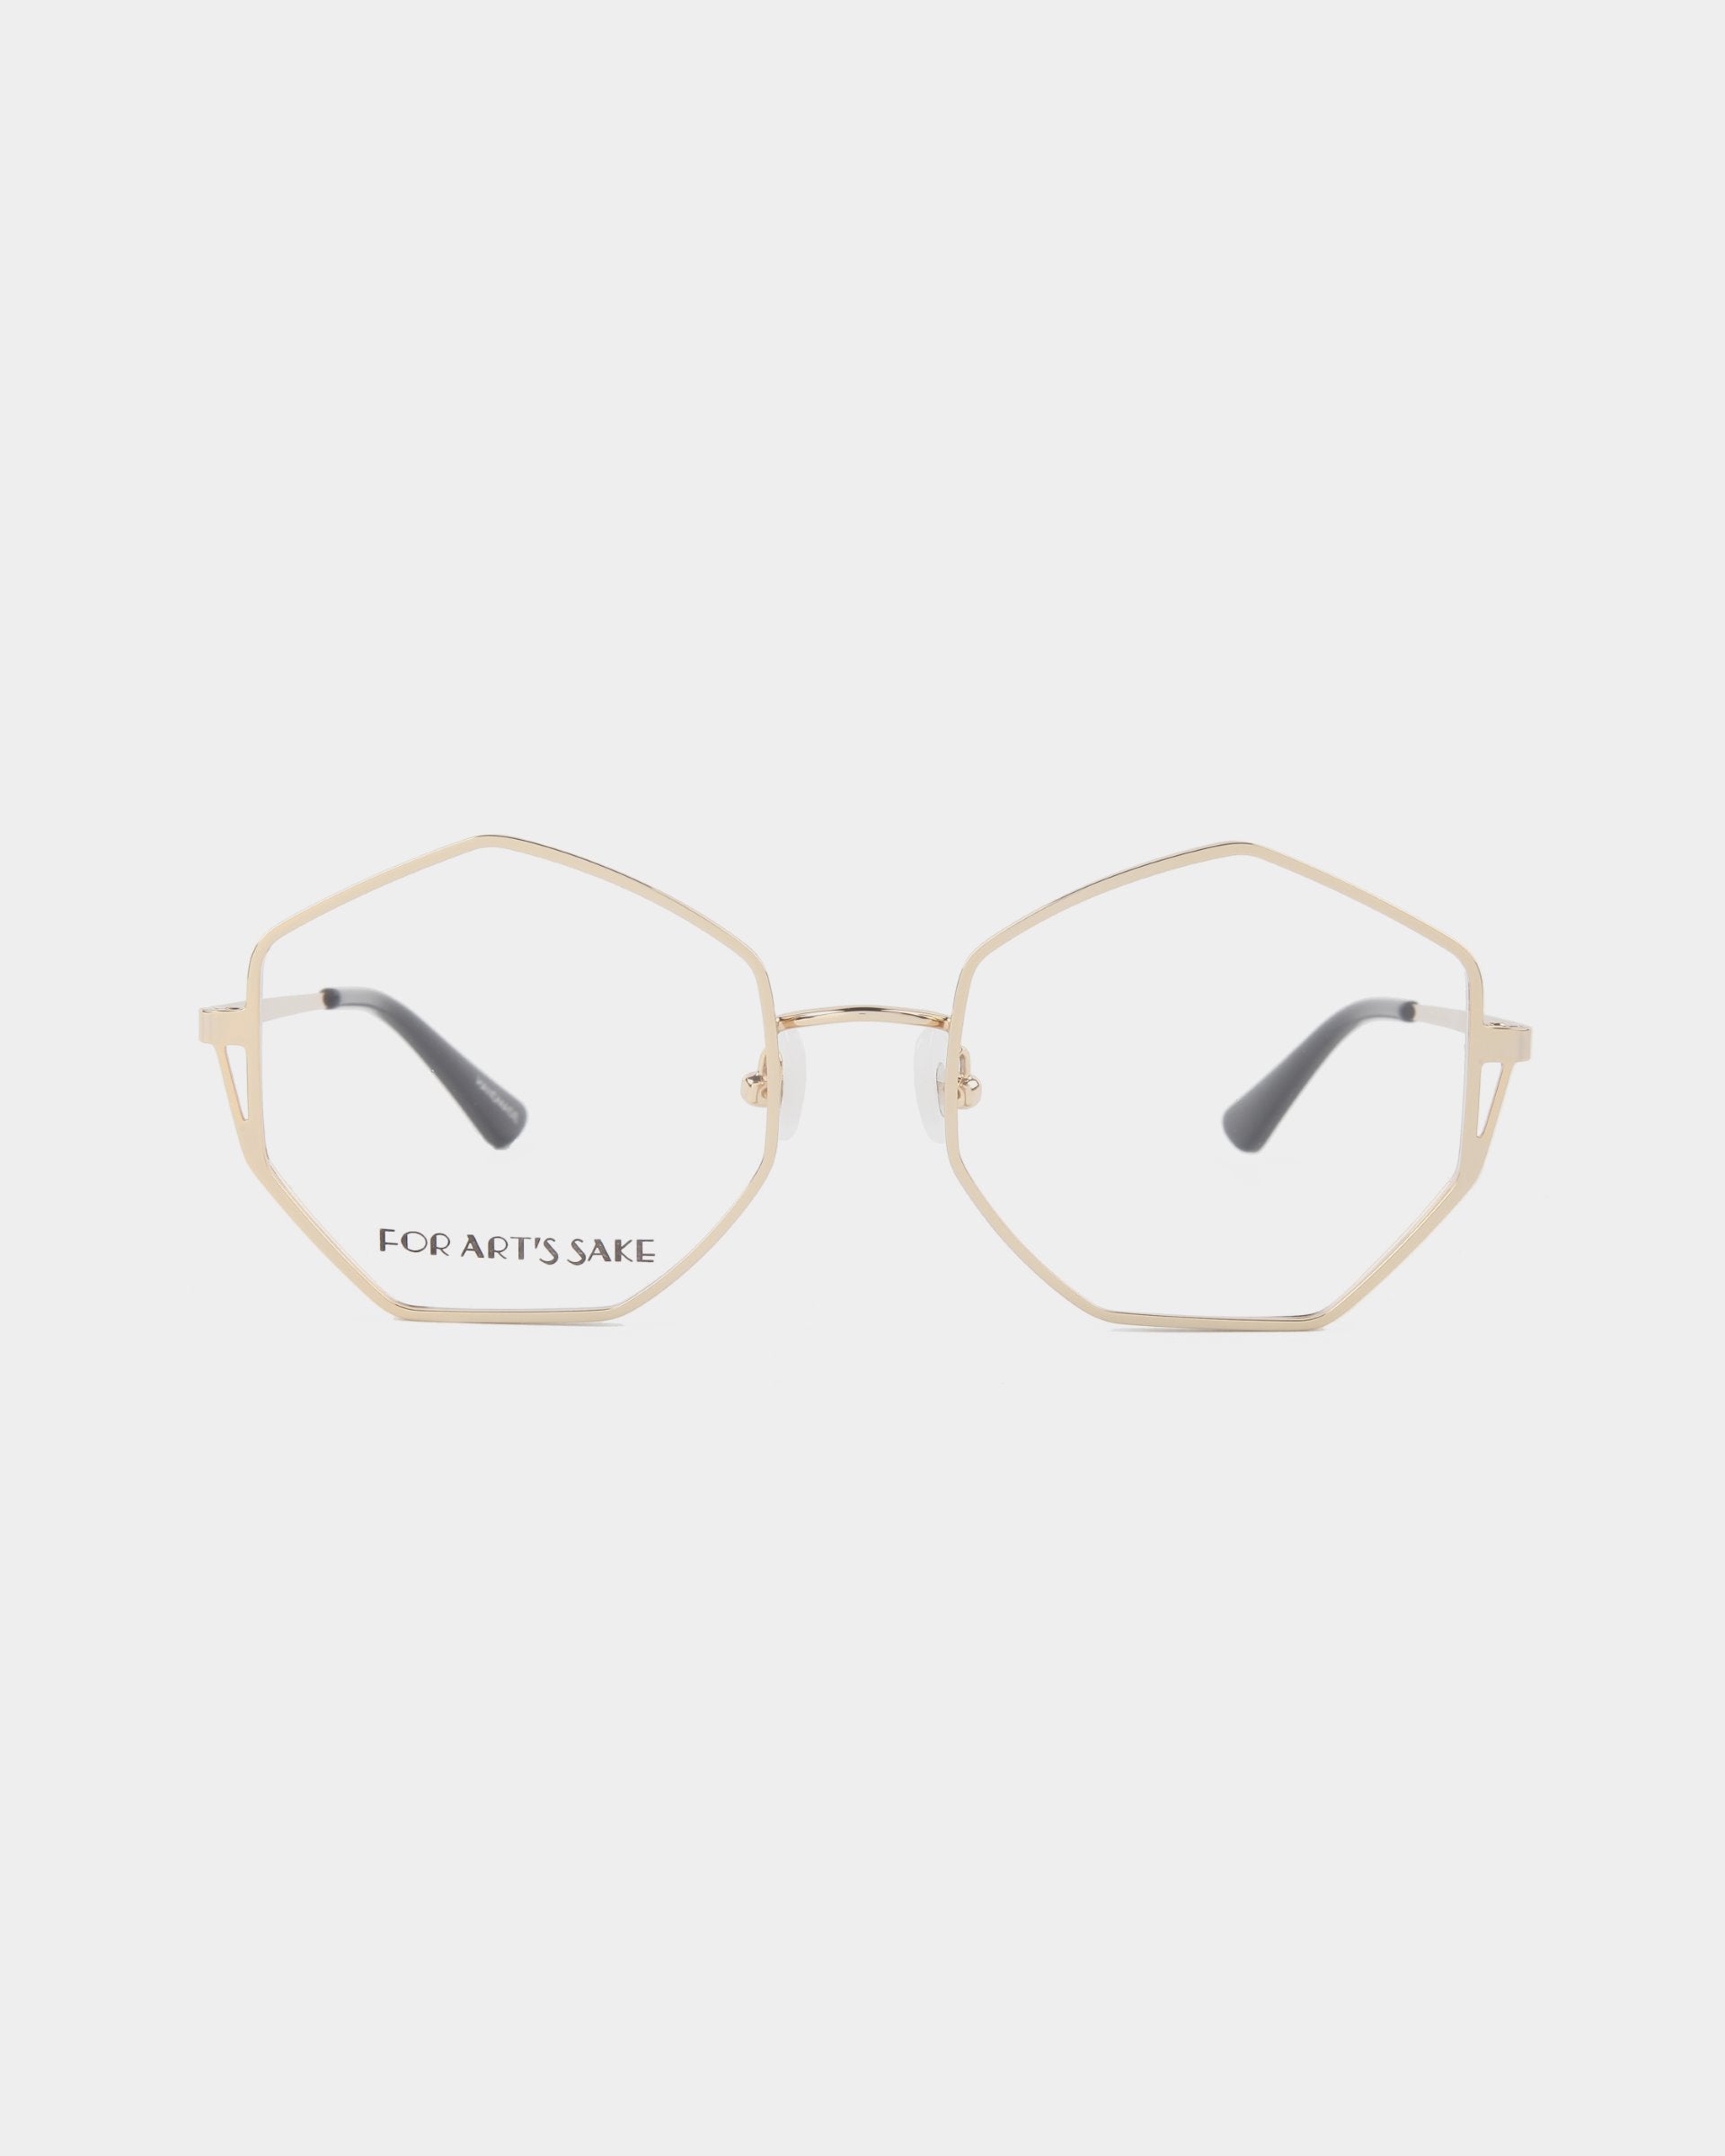 The Antidote by For Art&#39;s Sake® is a pair of eyeglasses with geometric, 18-karat gold-plated stainless steel frames and transparent lenses. The temples are adorned with black tips for added comfort.